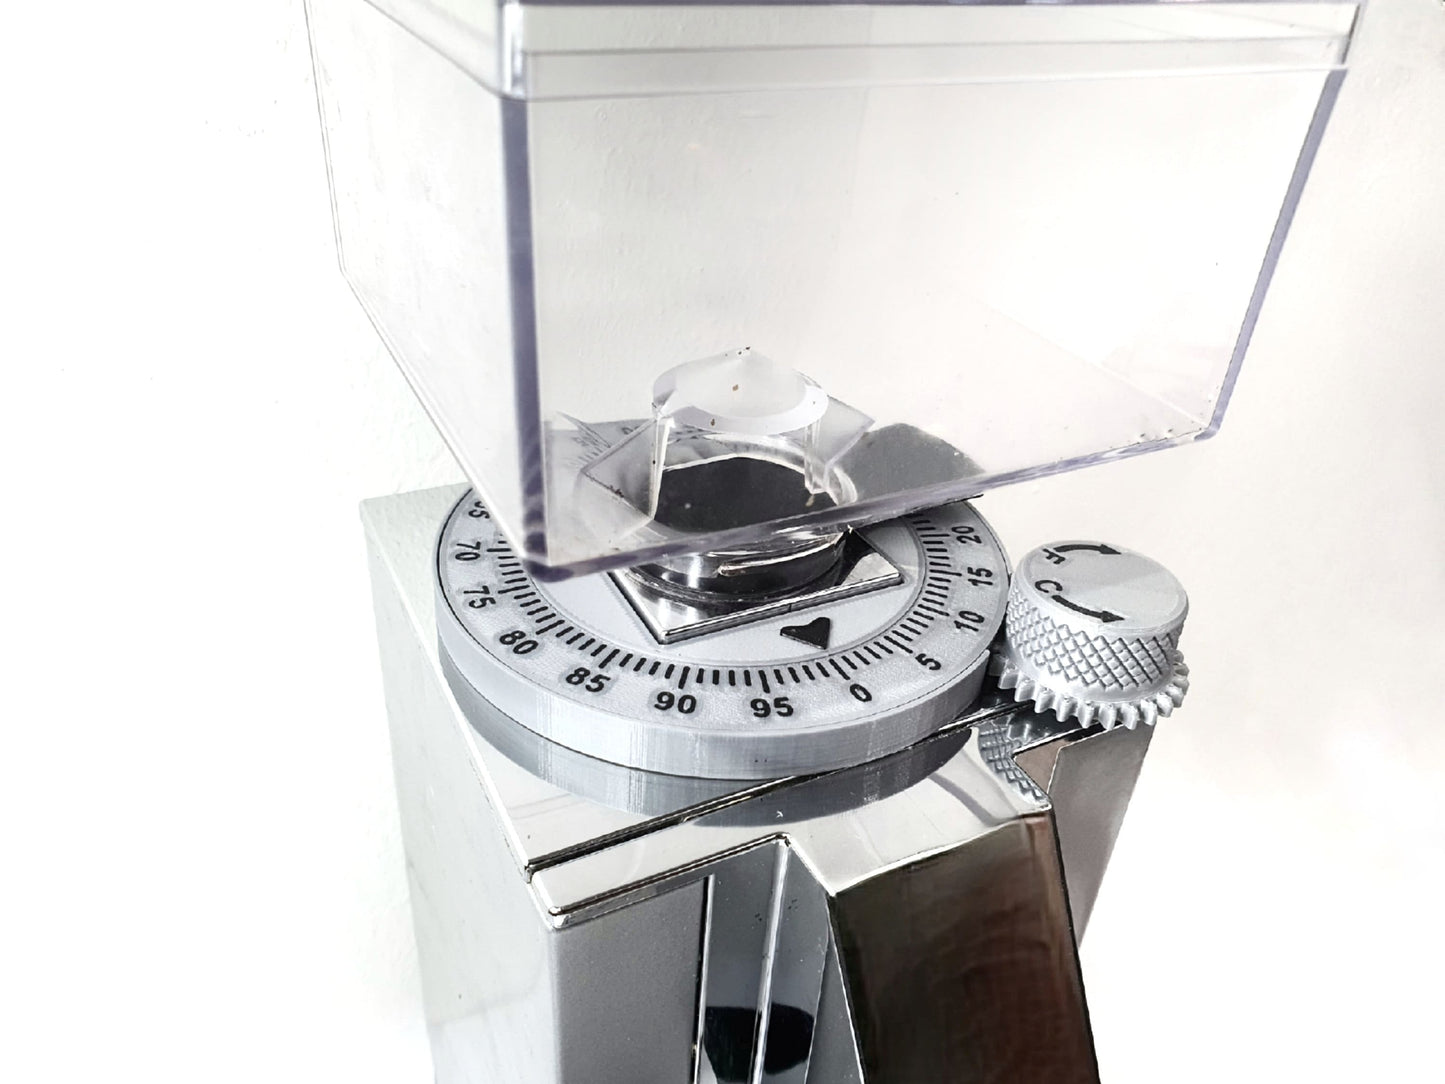 Eureka Mignon Grinder Setting Adjustment Dial Knob - Accurately Switch Between Grind Sizes